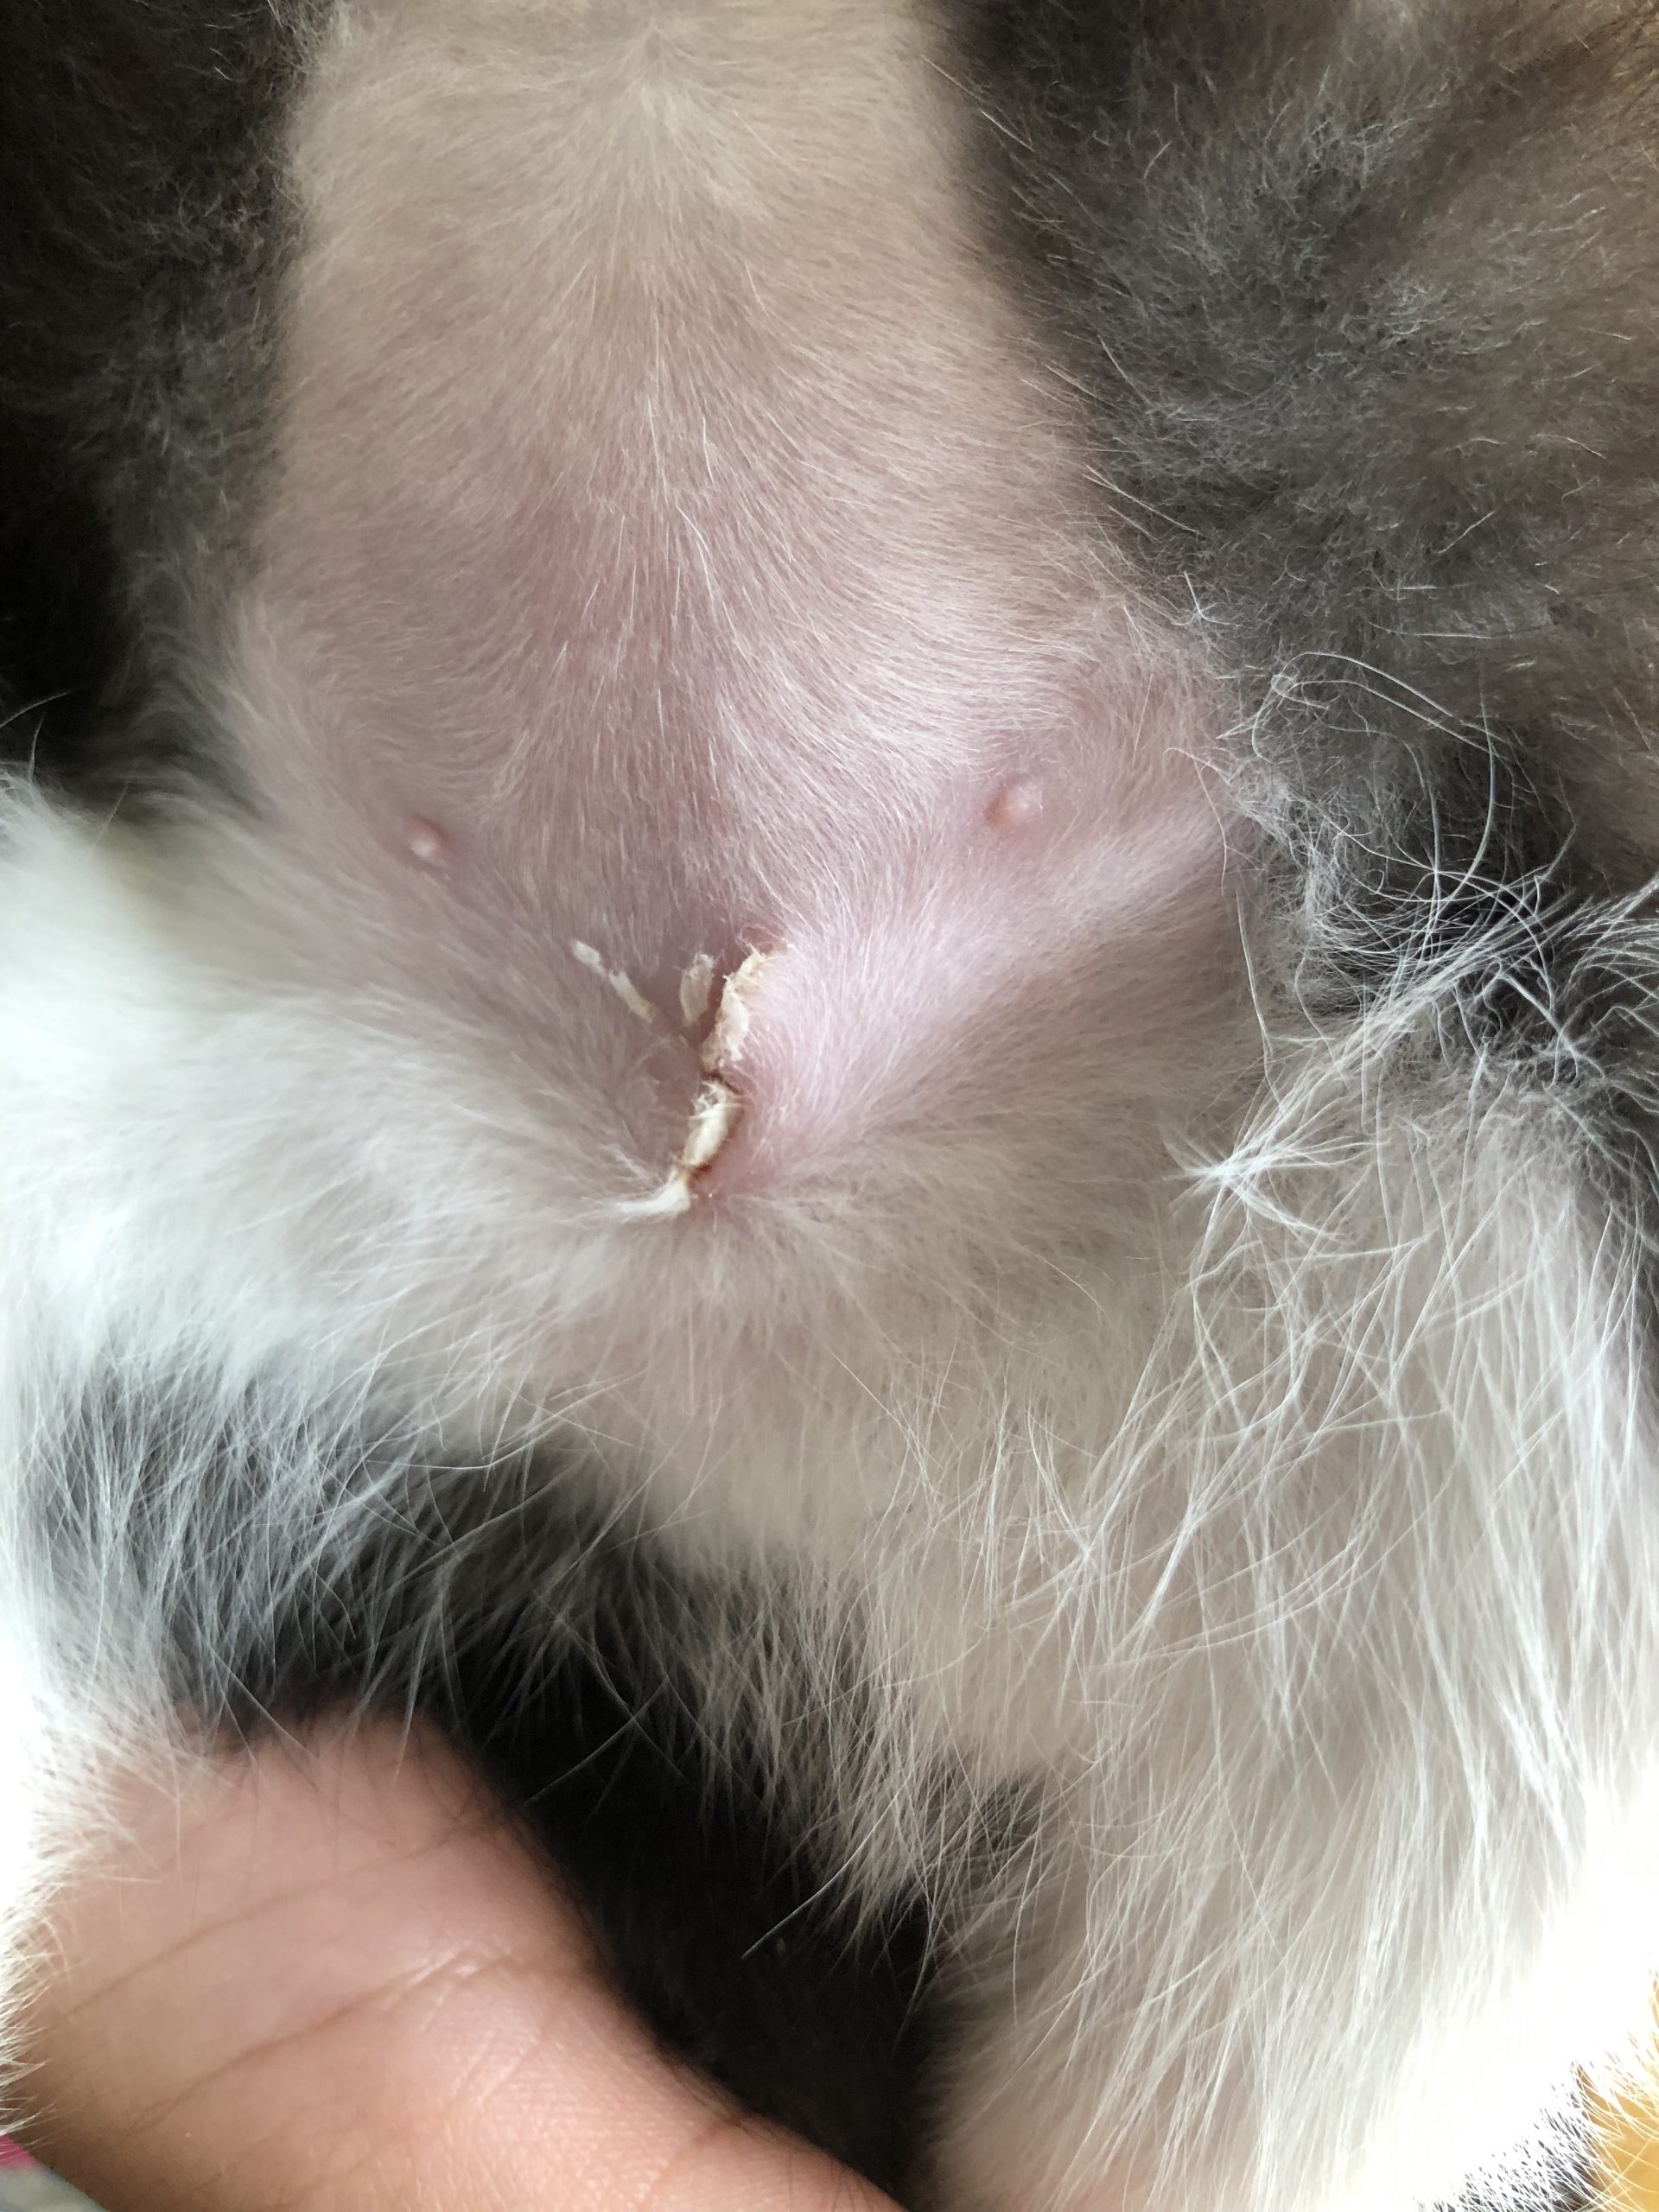 Is My Kittenâs Spay Incision Healing Properly?